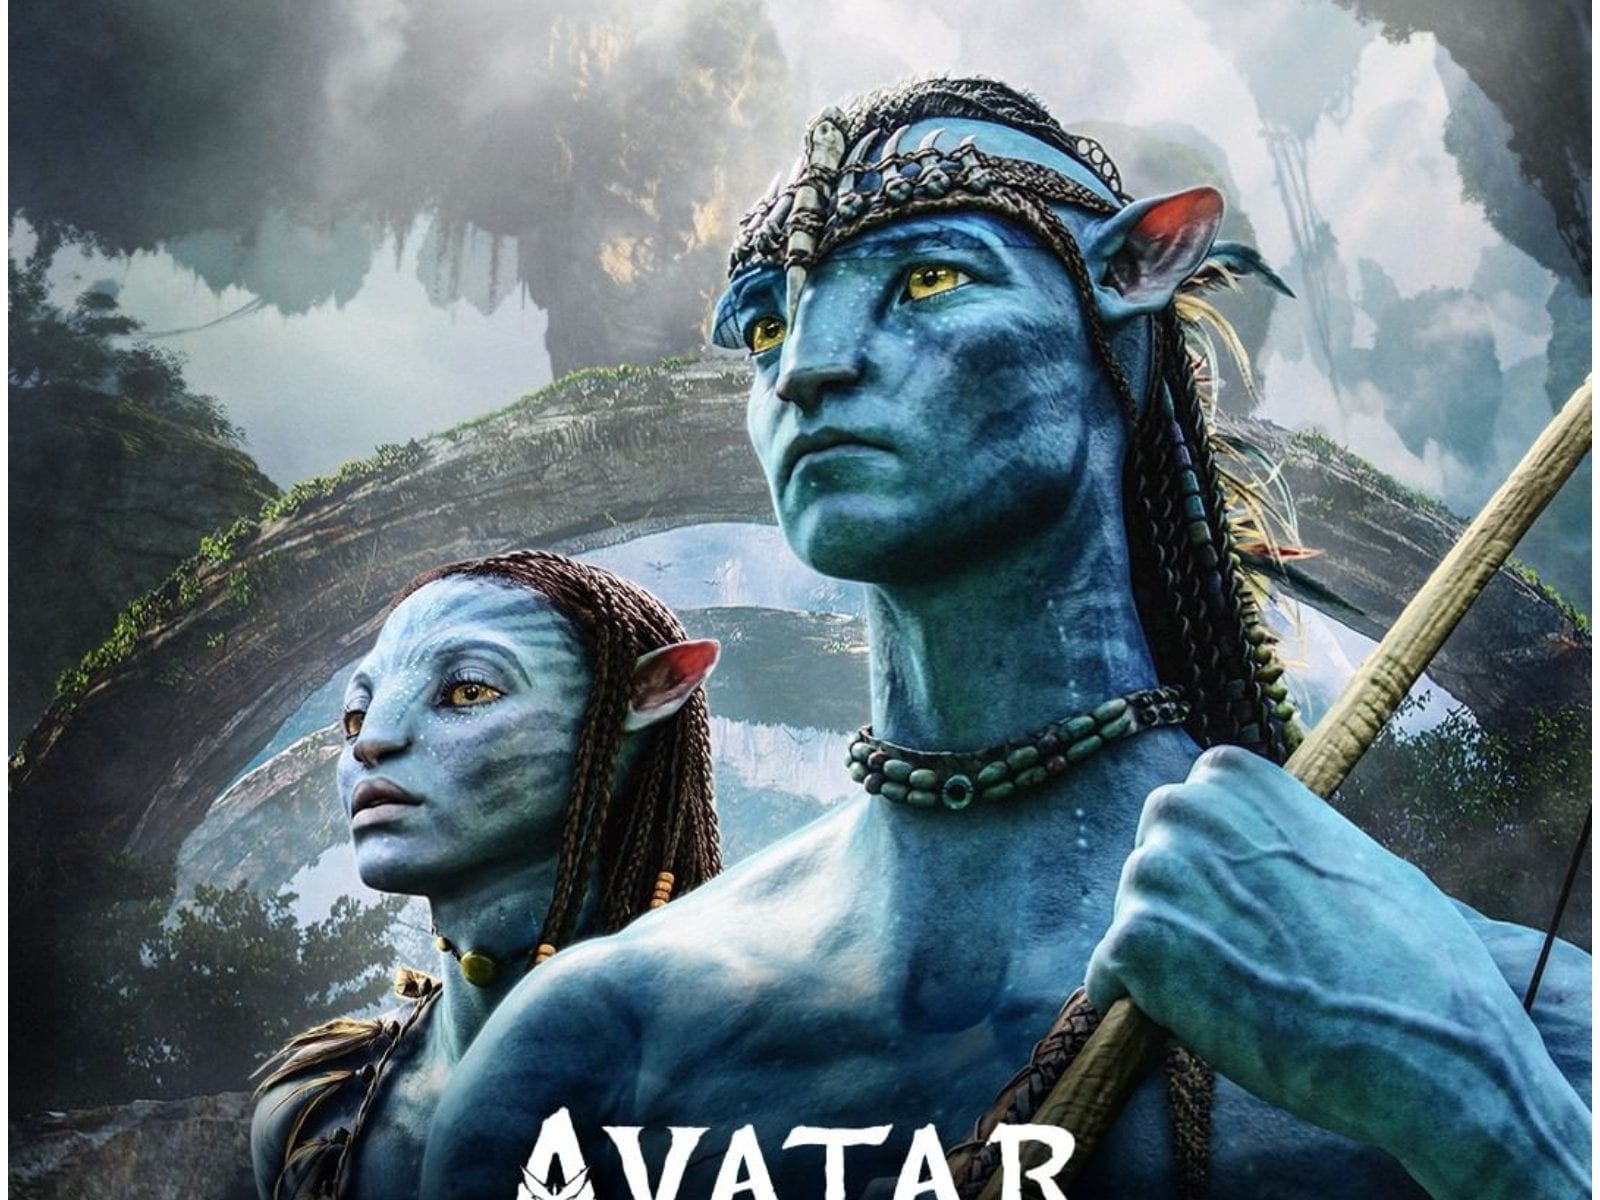 James Cameron: We Will Have to Find Out if People Show Up in Theatres for Avatar 2